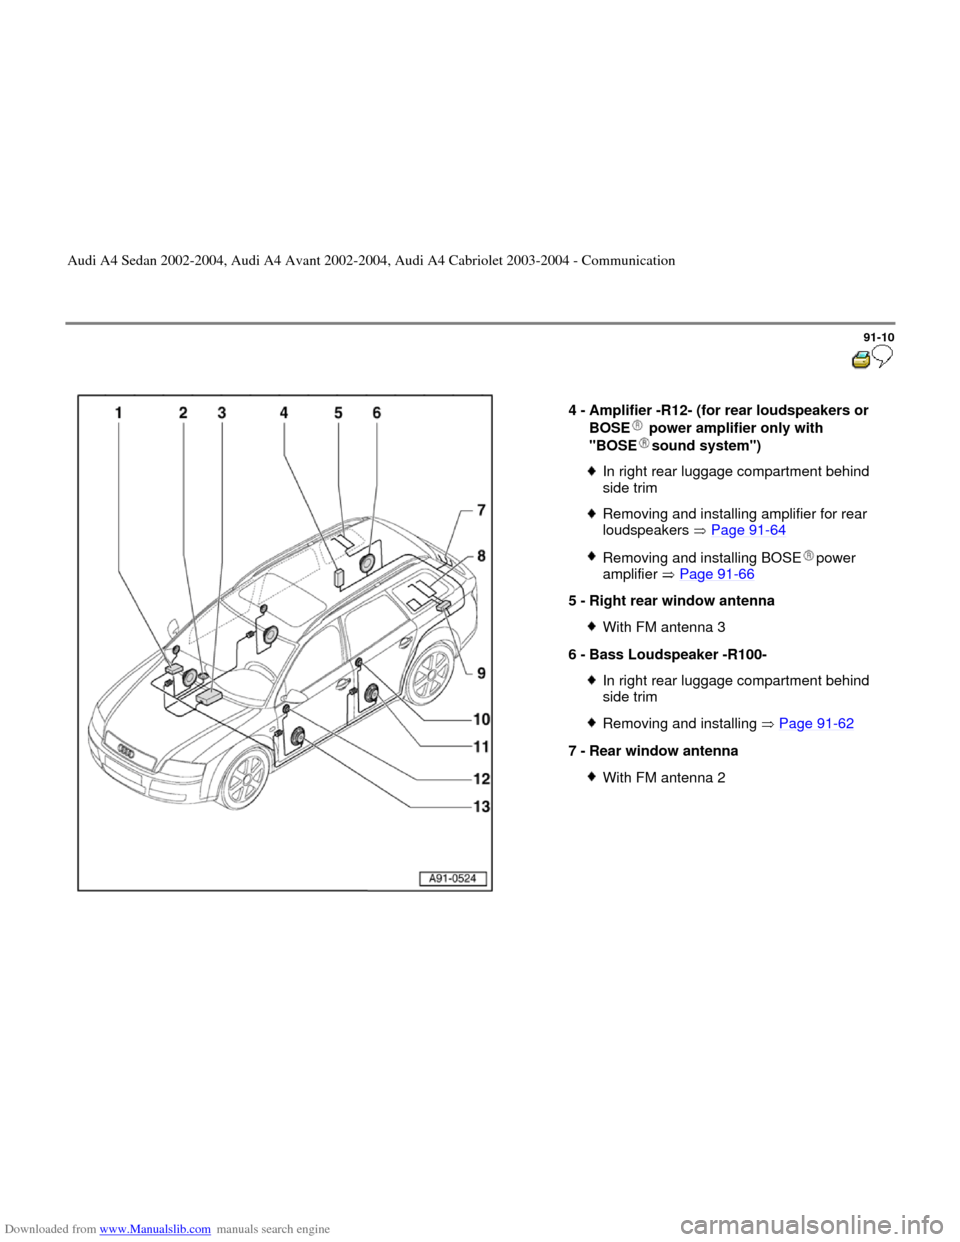 AUDI A4 2002 B5 / 1.G Radio System General Information Downloaded from www.Manualslib.com manuals search engine 91-10
 
  
4 - 
Amplifier -R12- (for rear loudspeakers or 
BOSE  power amplifier only with 
"BOSE sound system") 
In right rear luggage compart